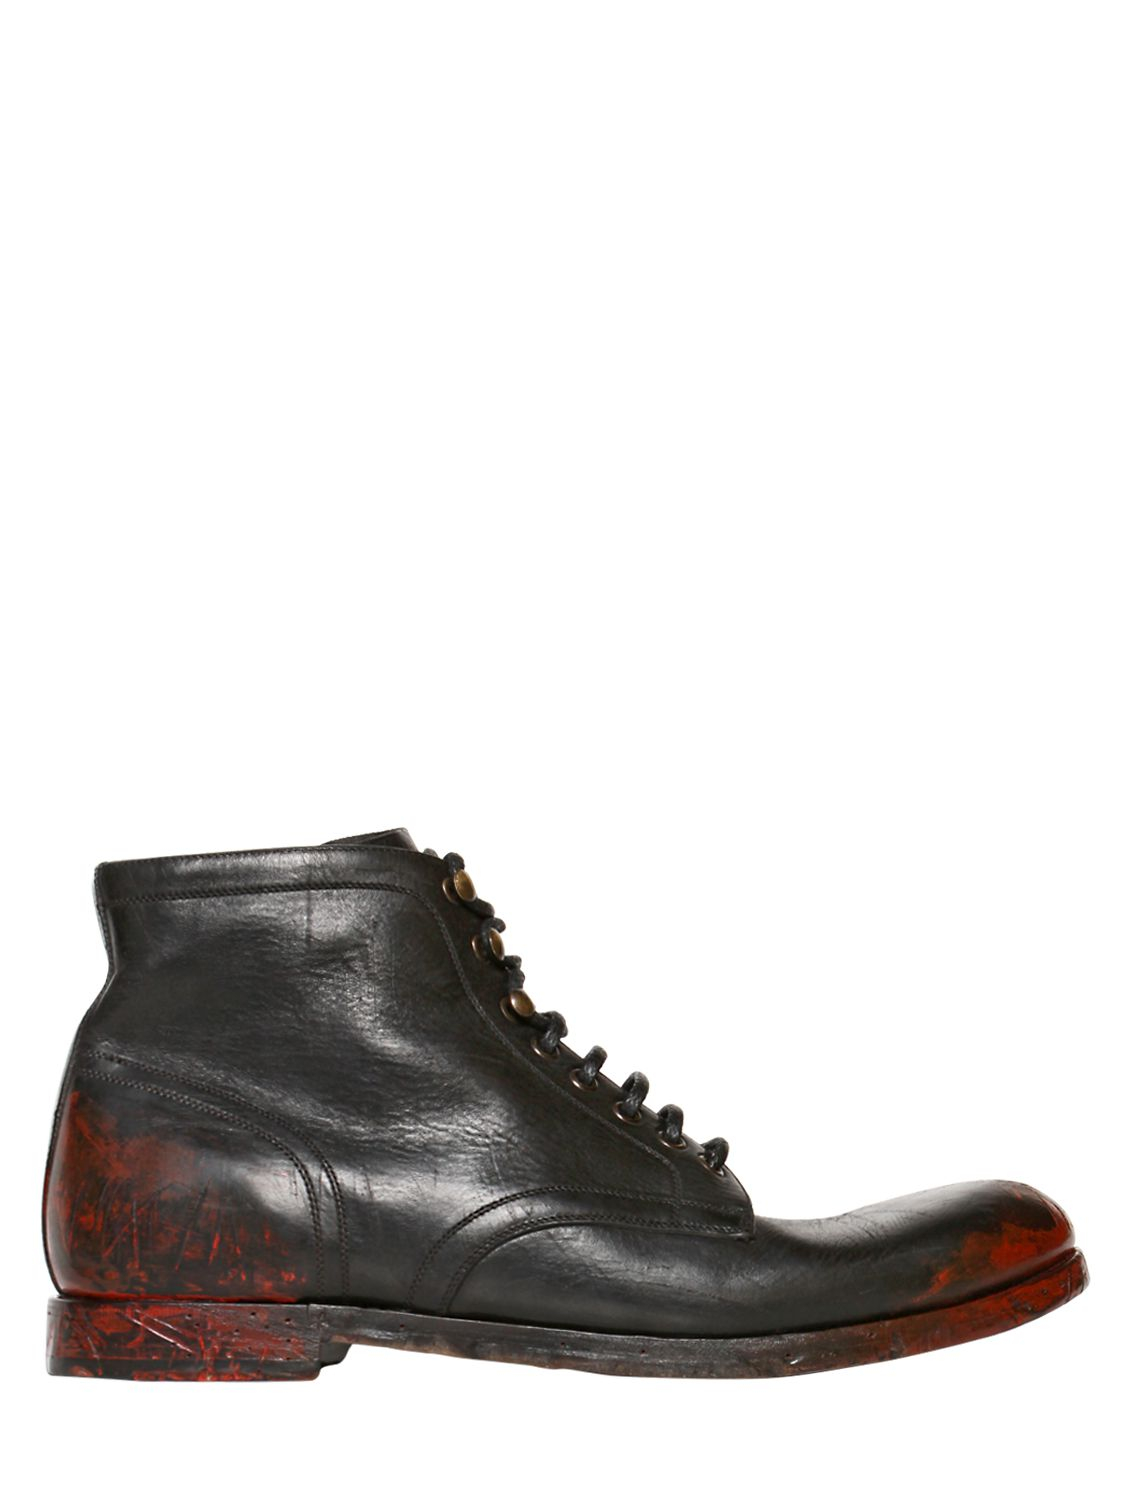 Dolce & Gabbana Siracusa Pollock Painted Calf Ankle Boot in Black/Red ...